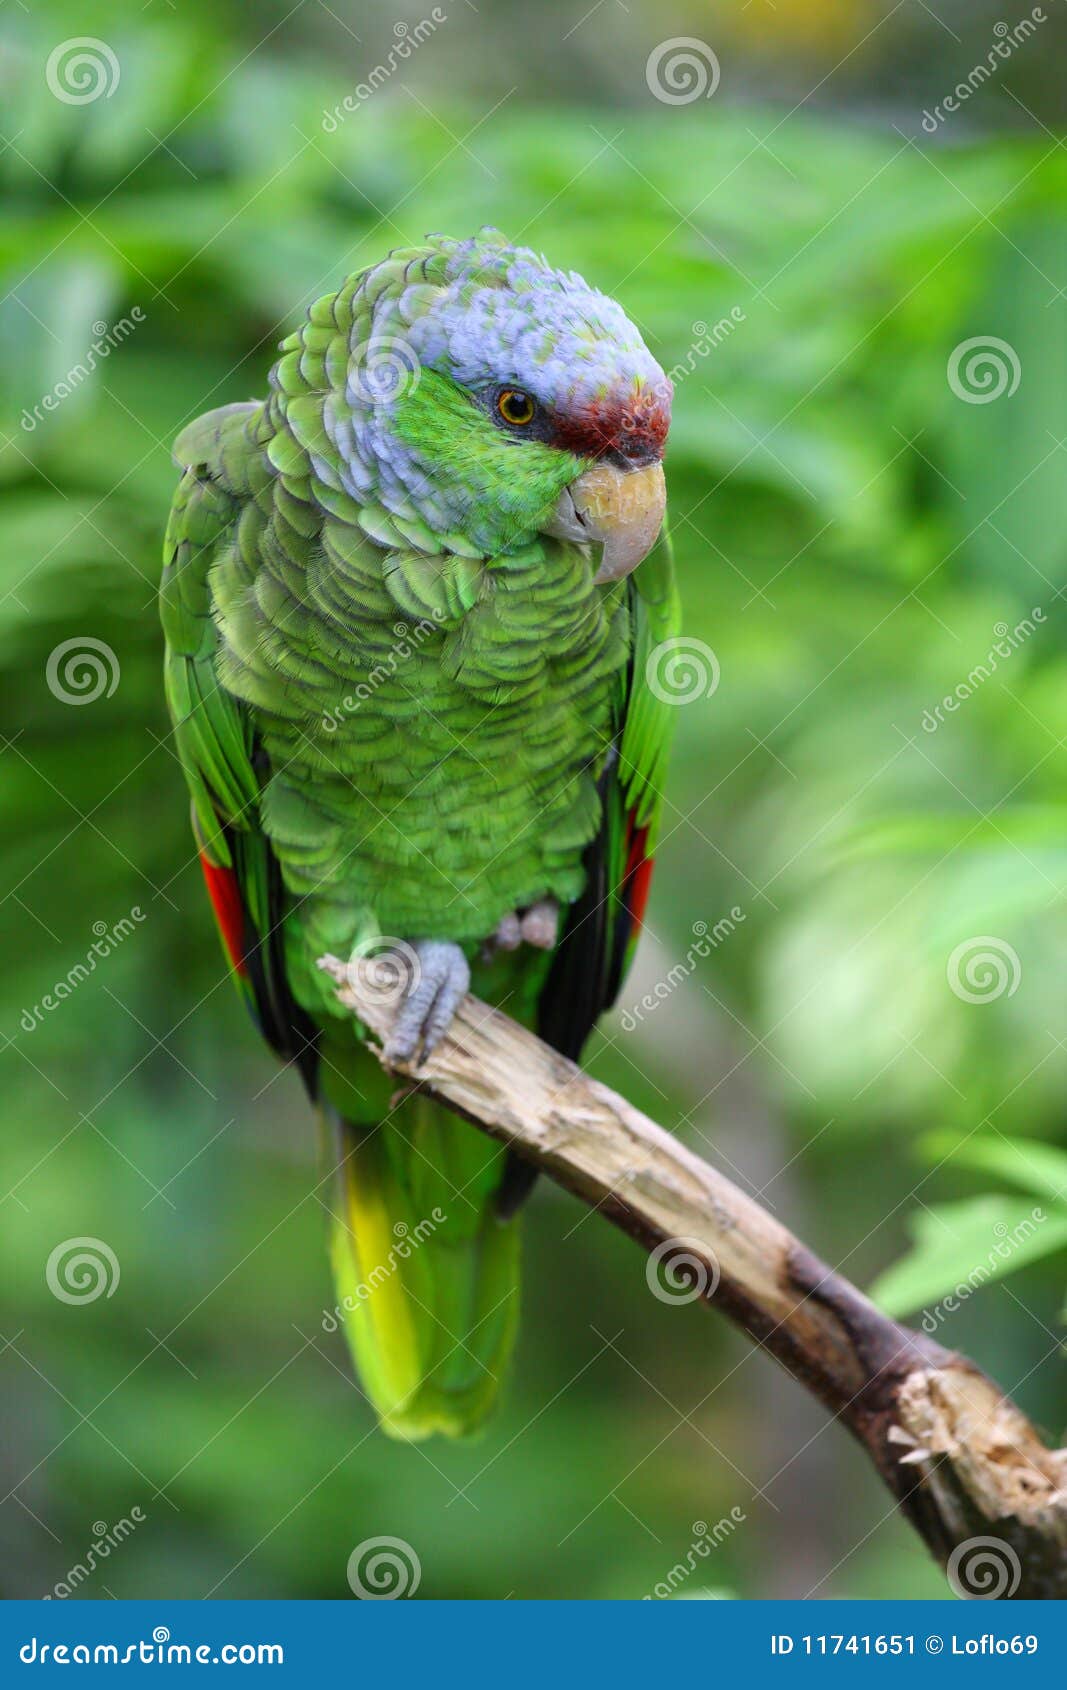 lilac-crowned amazon parrot